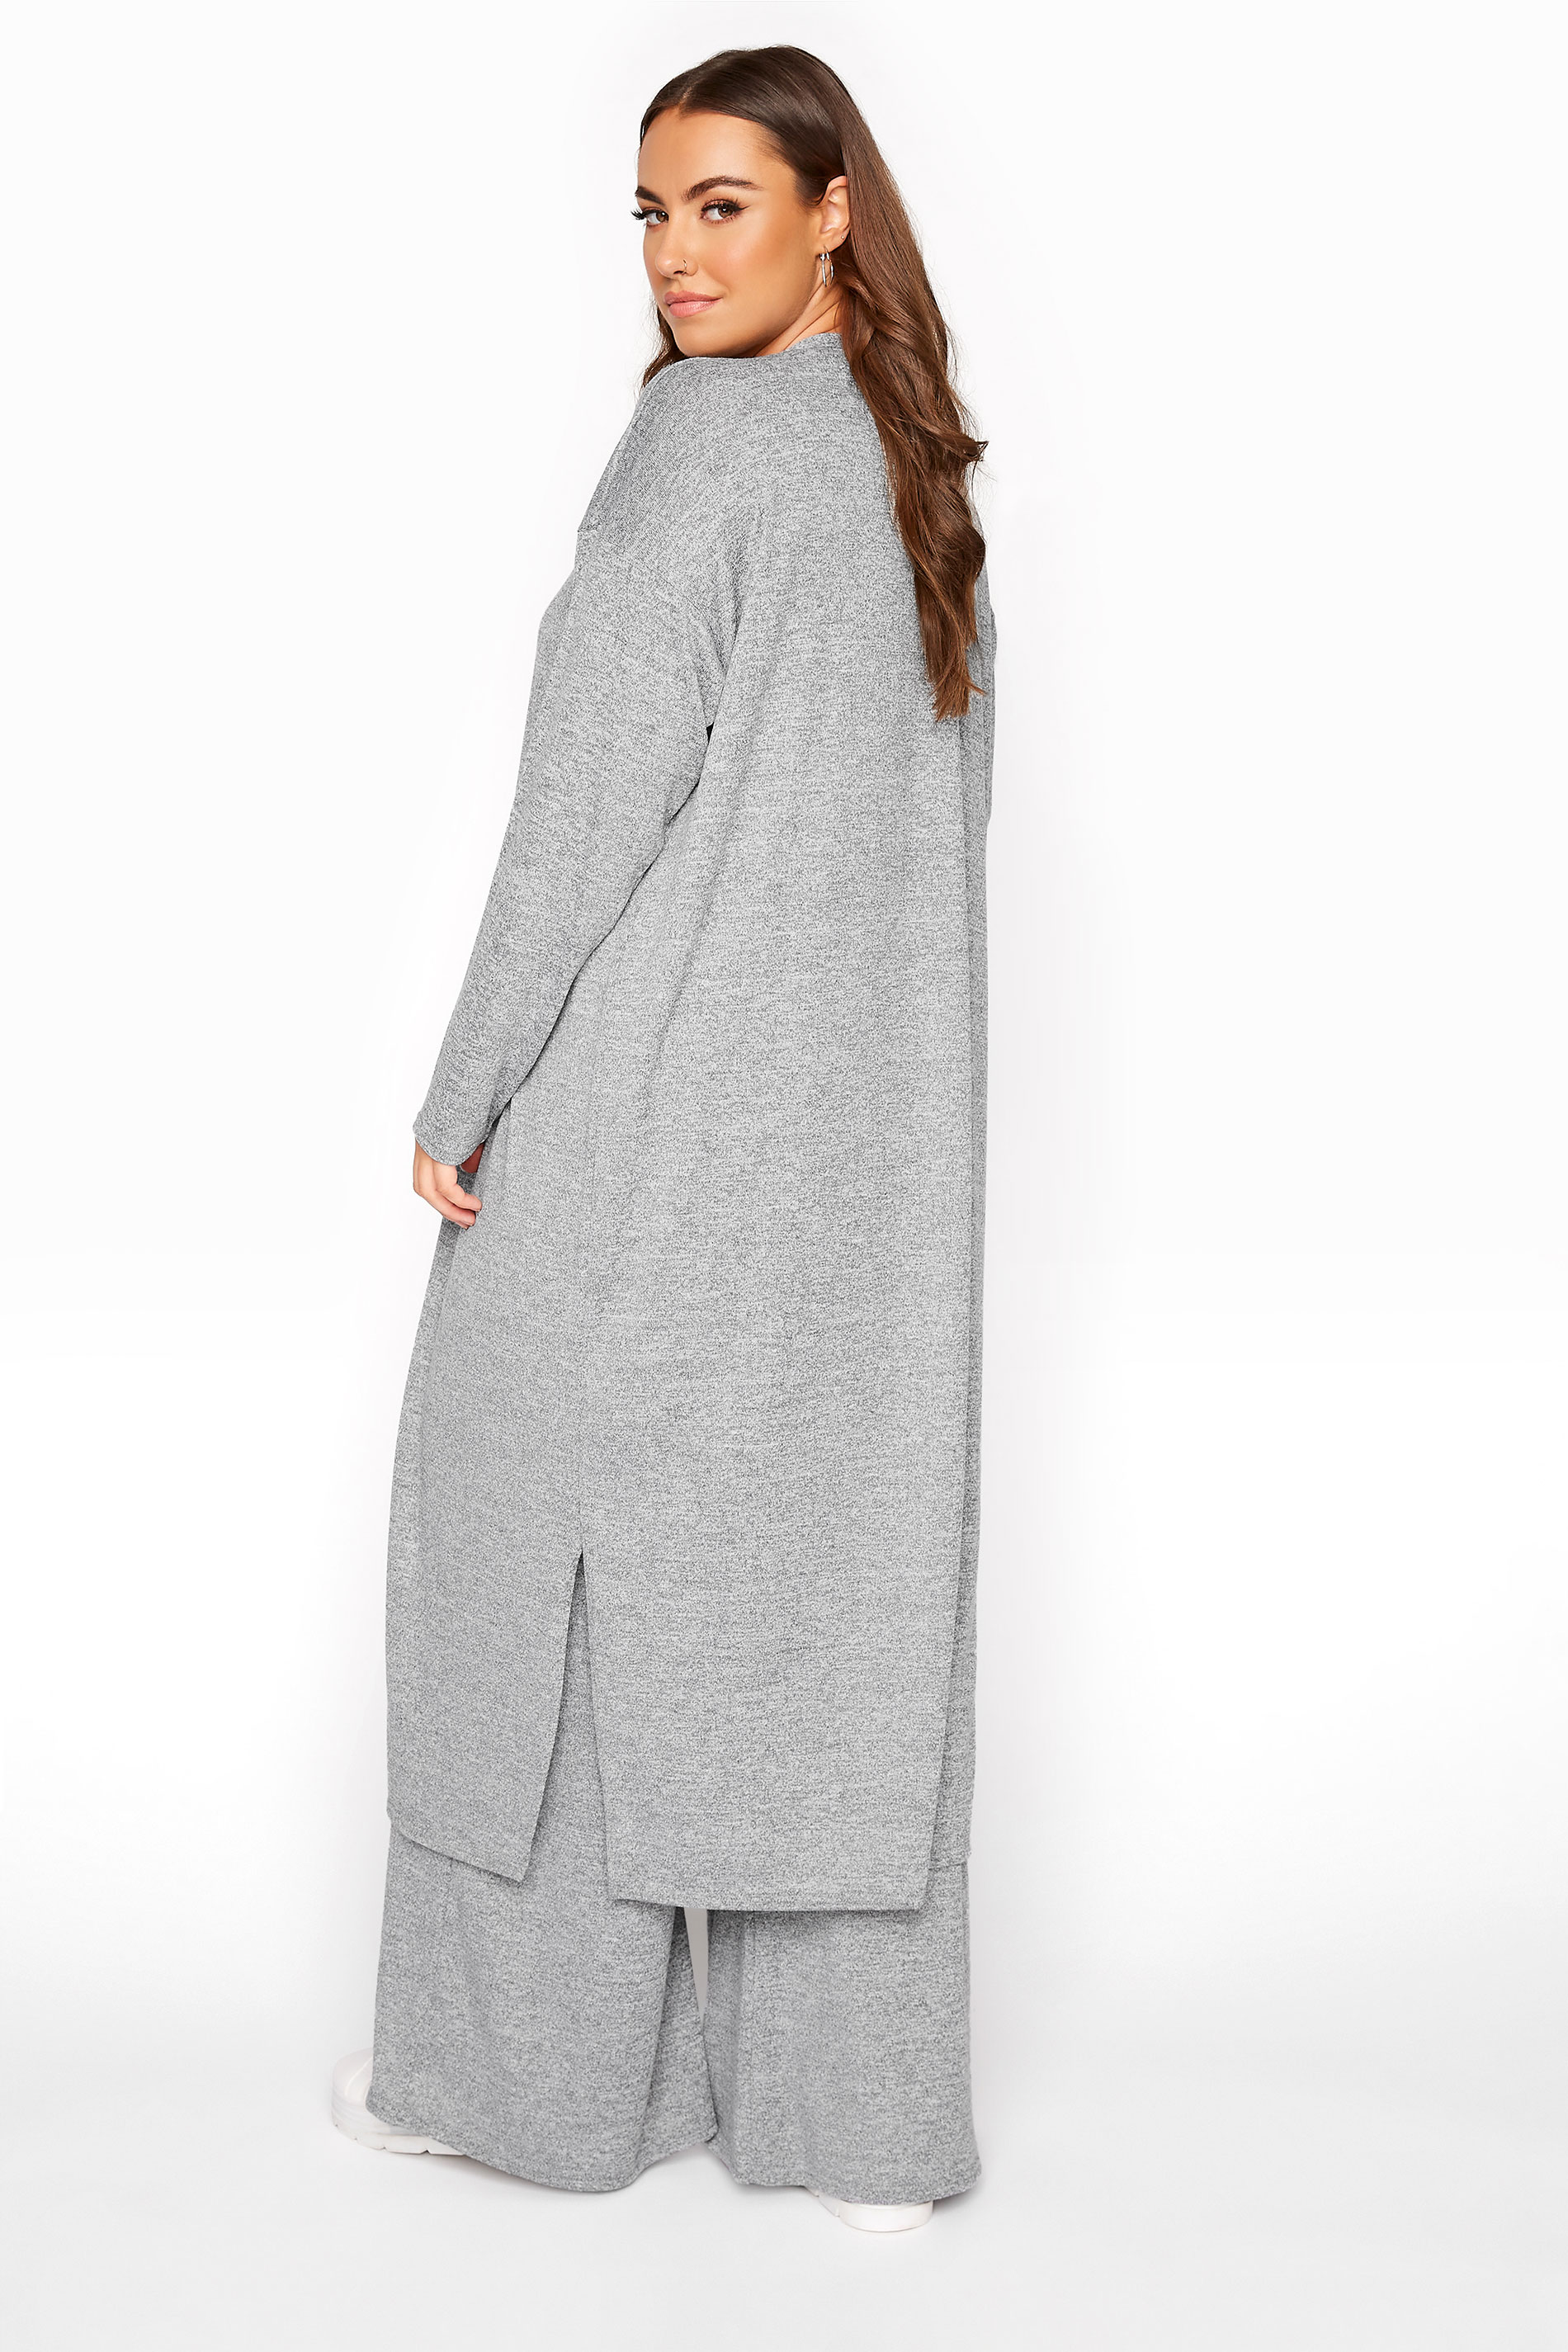 LIMITED COLLECTION Grey Longline Lounge Cardigan | Yours Clothing